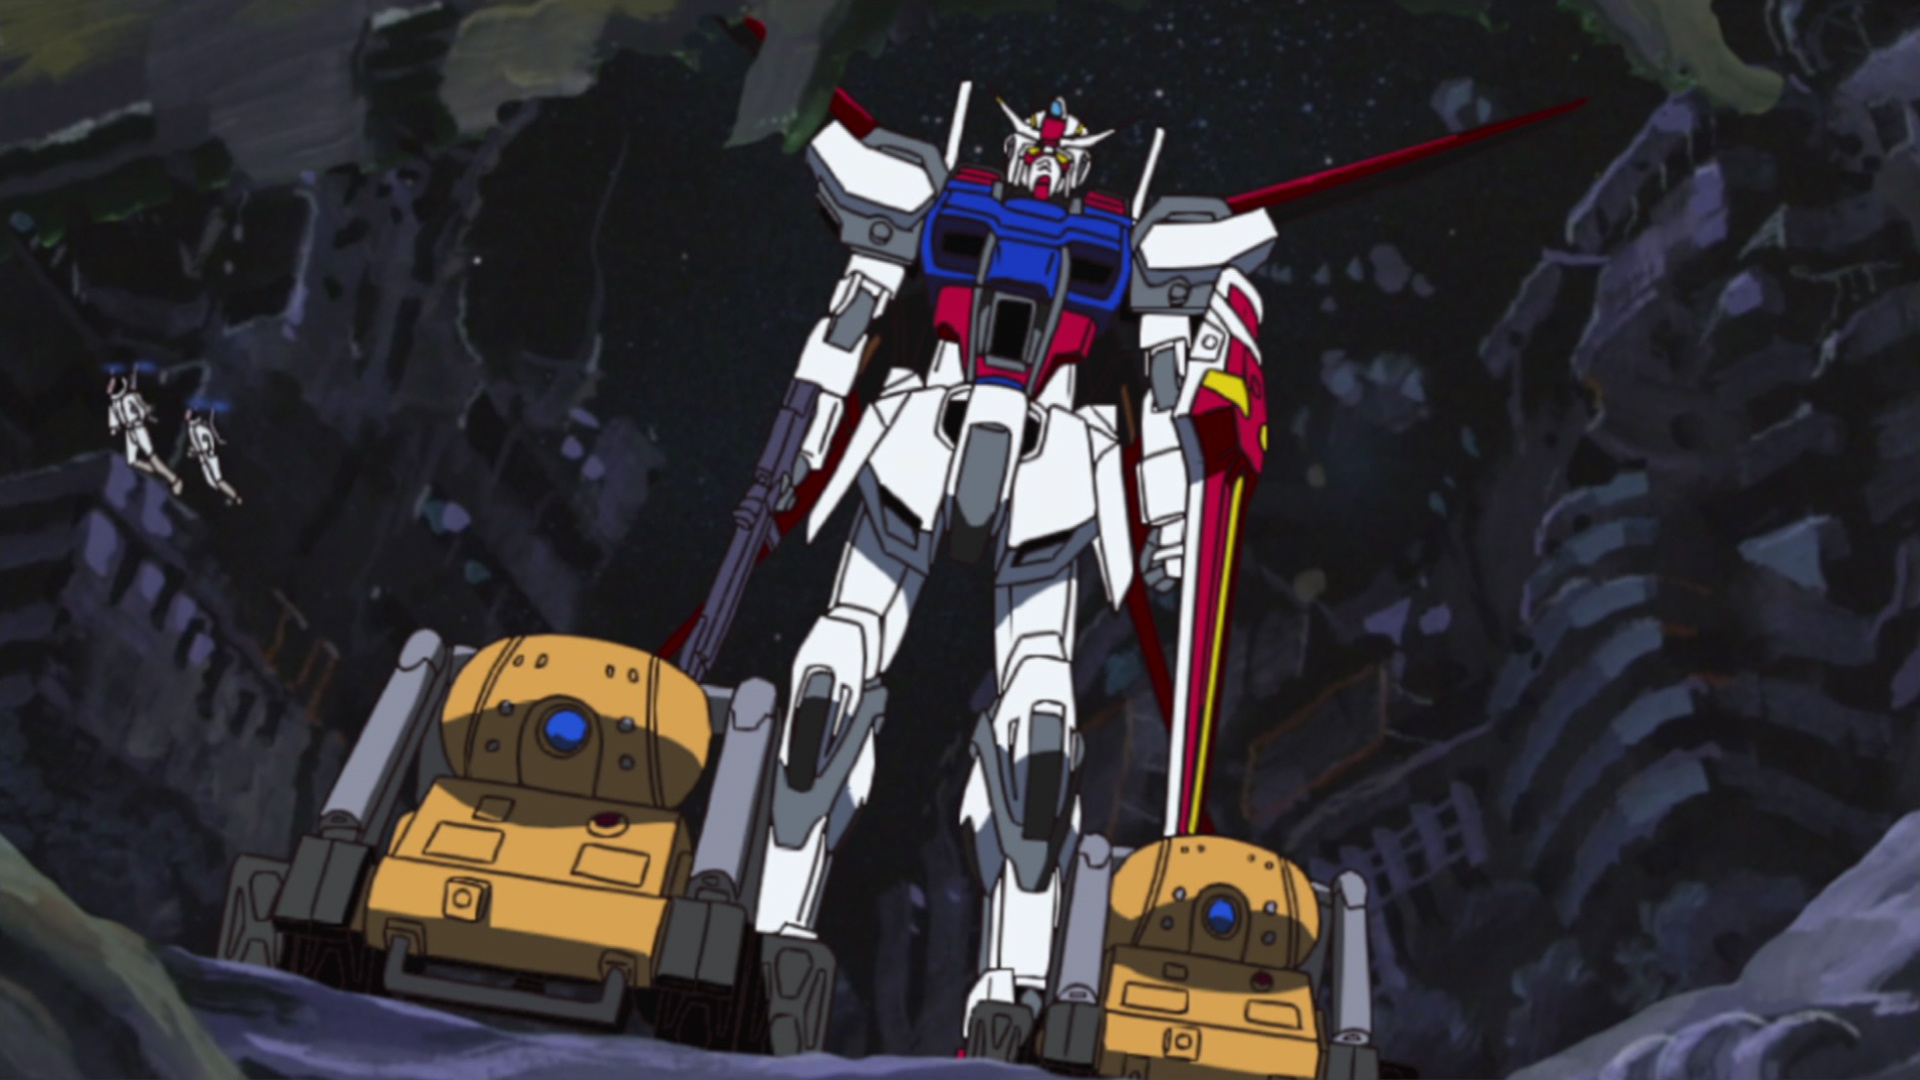 where to watch mobile suit gundam dubbed online